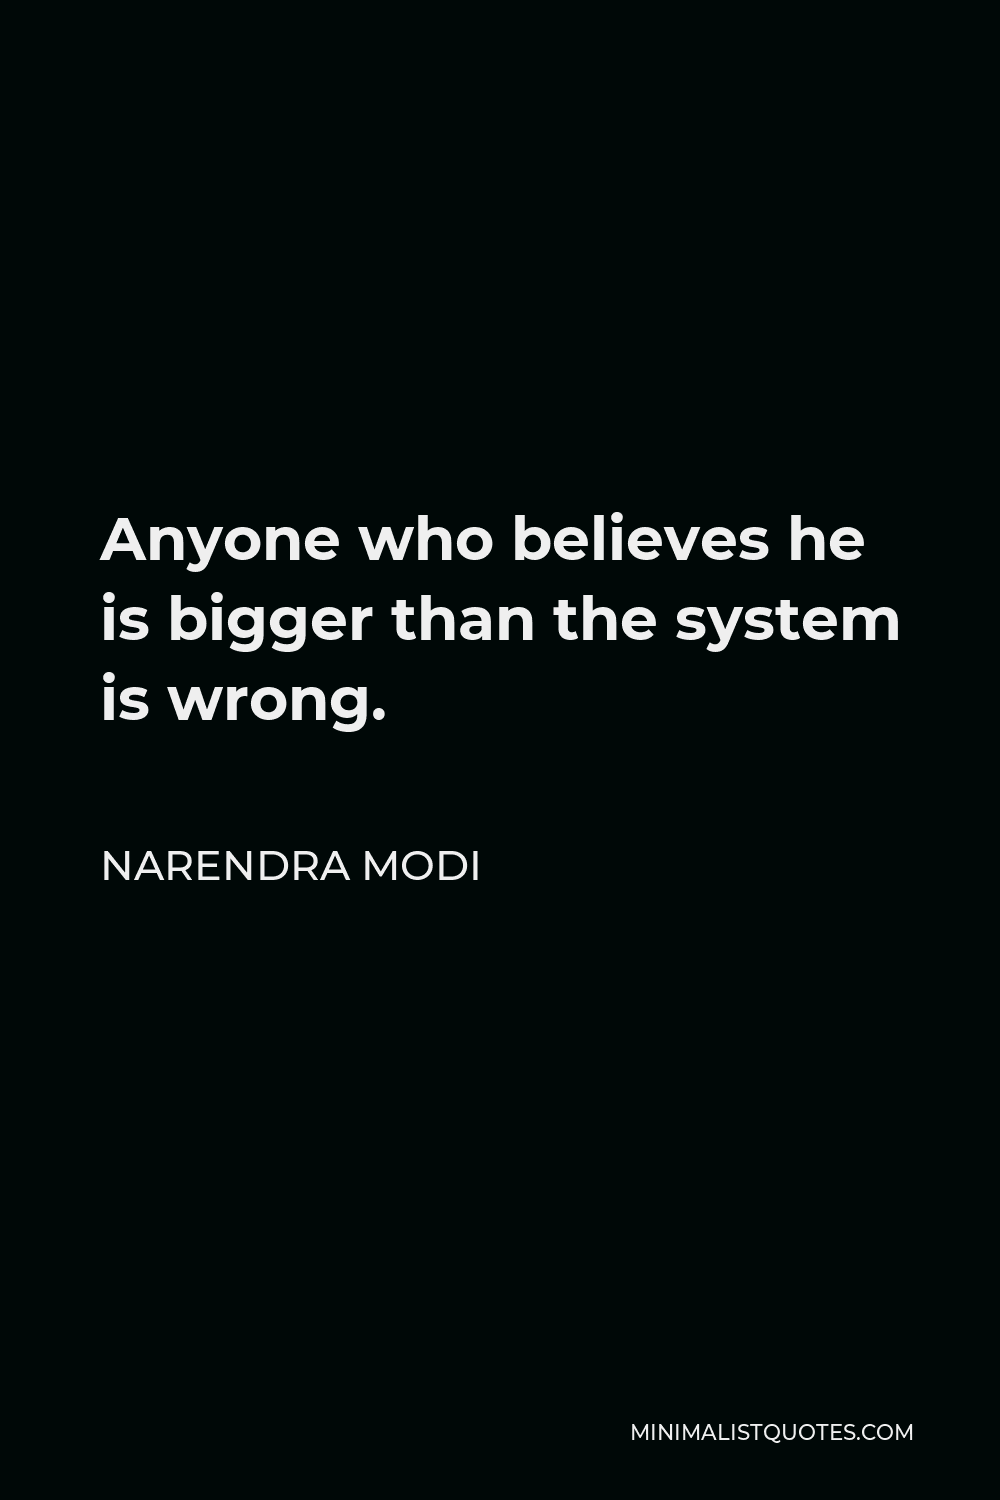 Narendra Modi Quote - Anyone who believes he is bigger than the system is wrong.